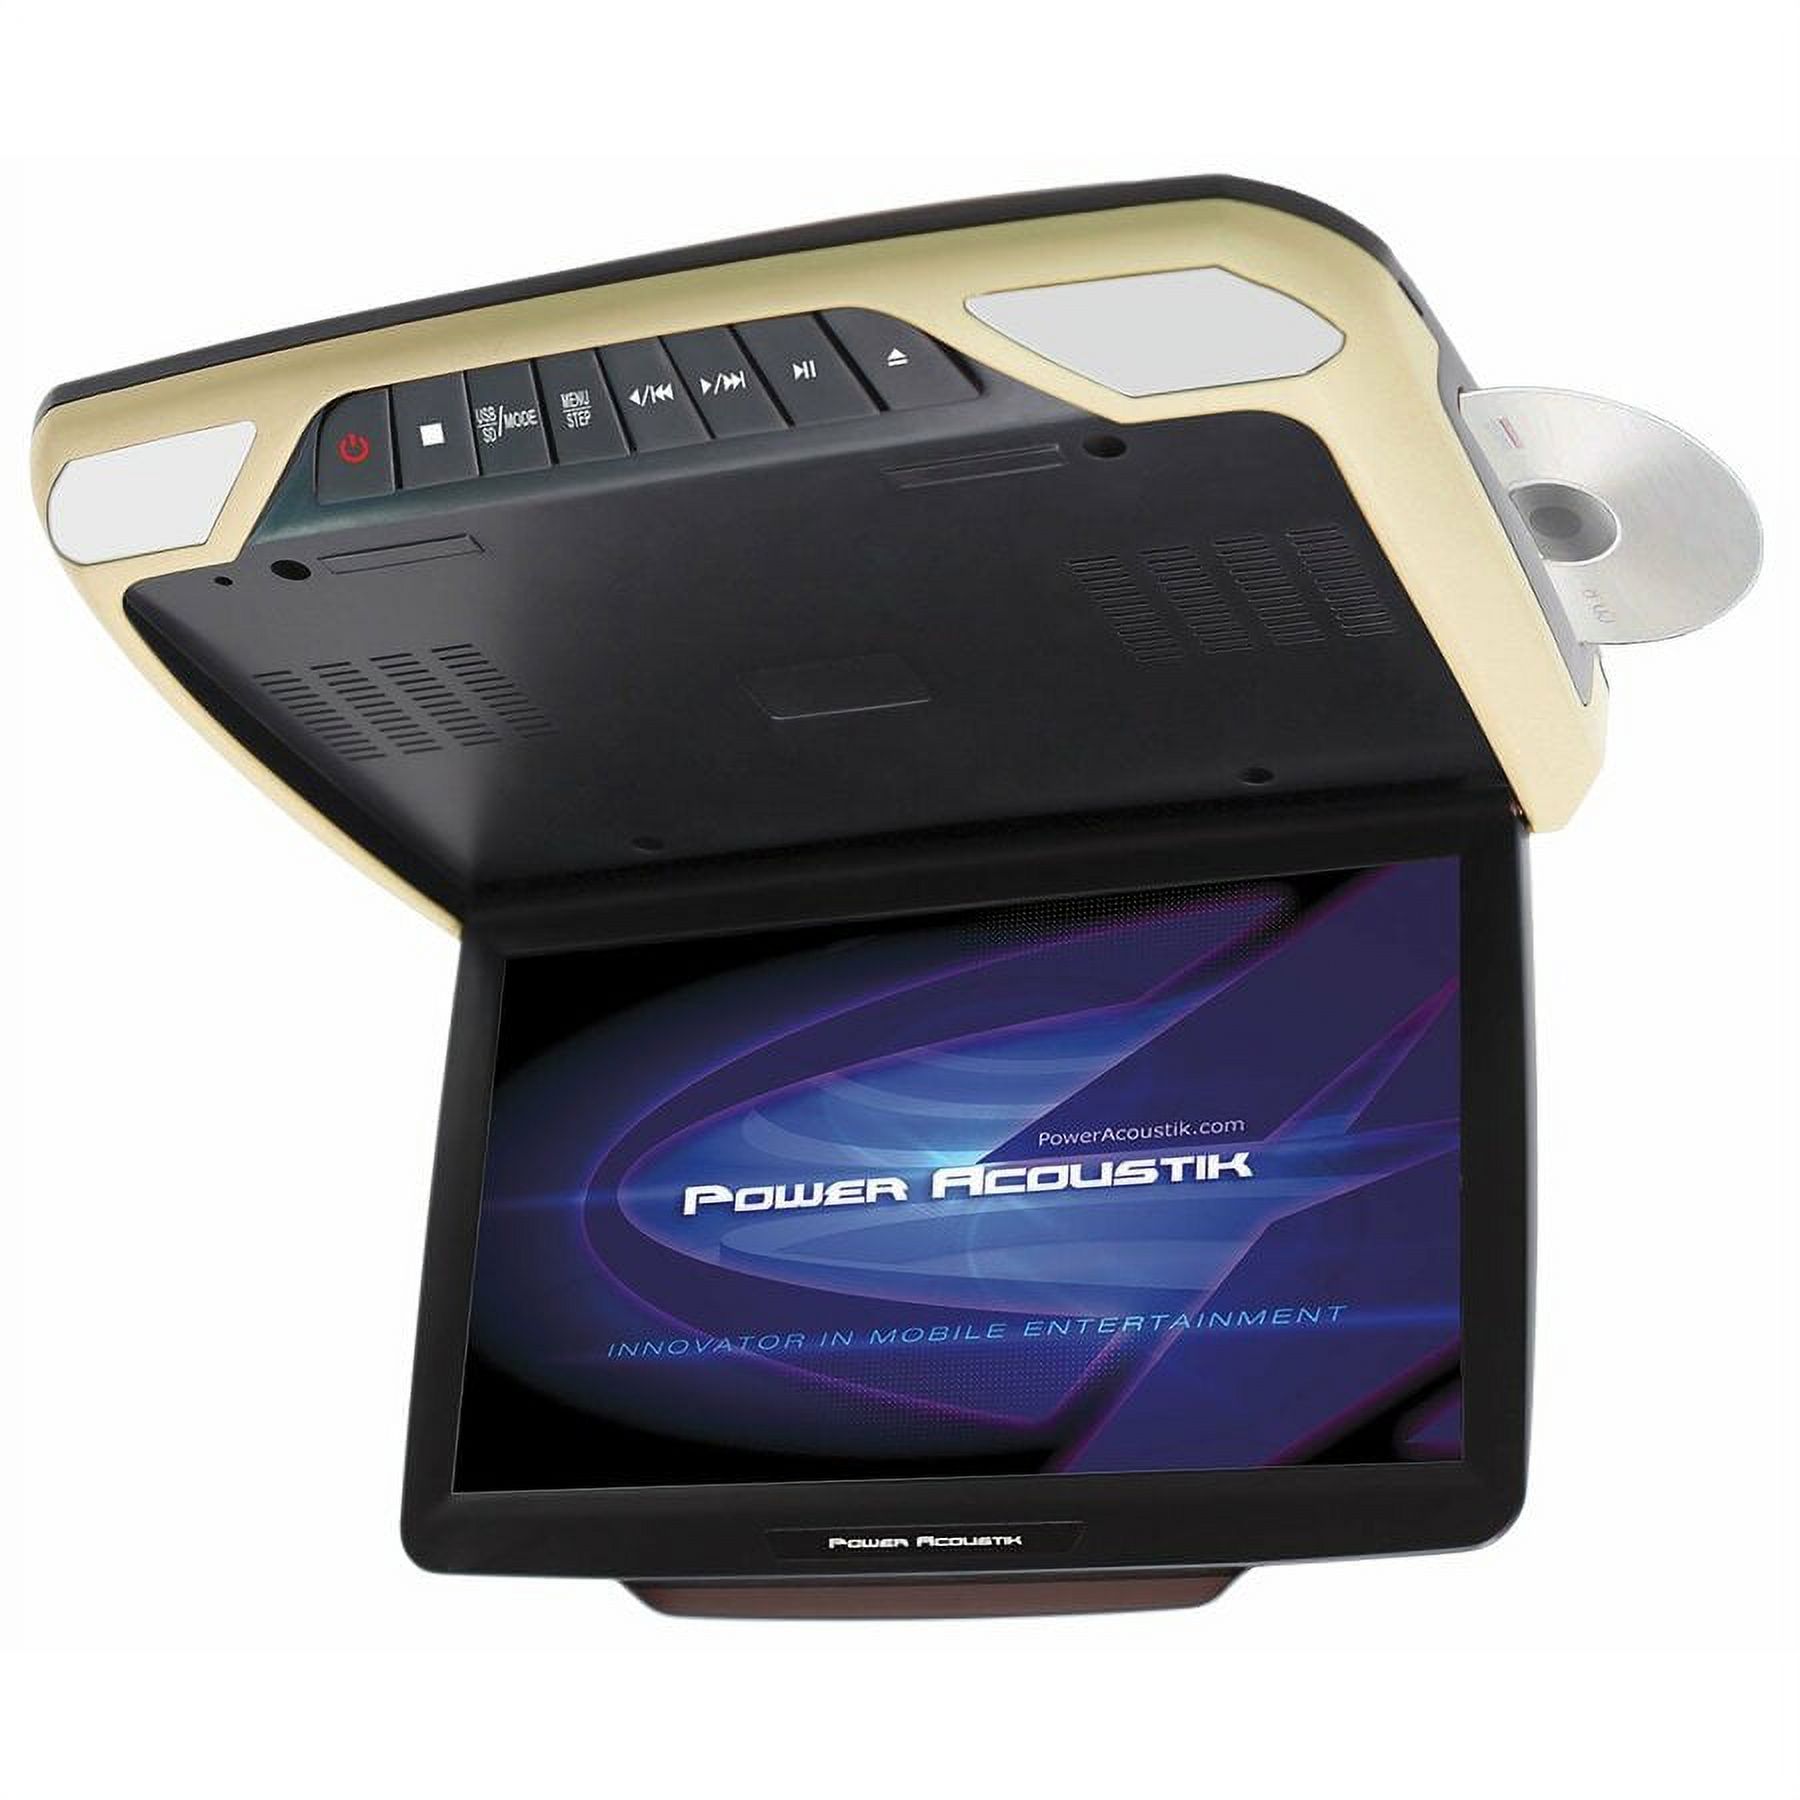 Power Acoustik PMD-143H Car DVD Player, 14.3" LCD, 16:9 - image 3 of 3